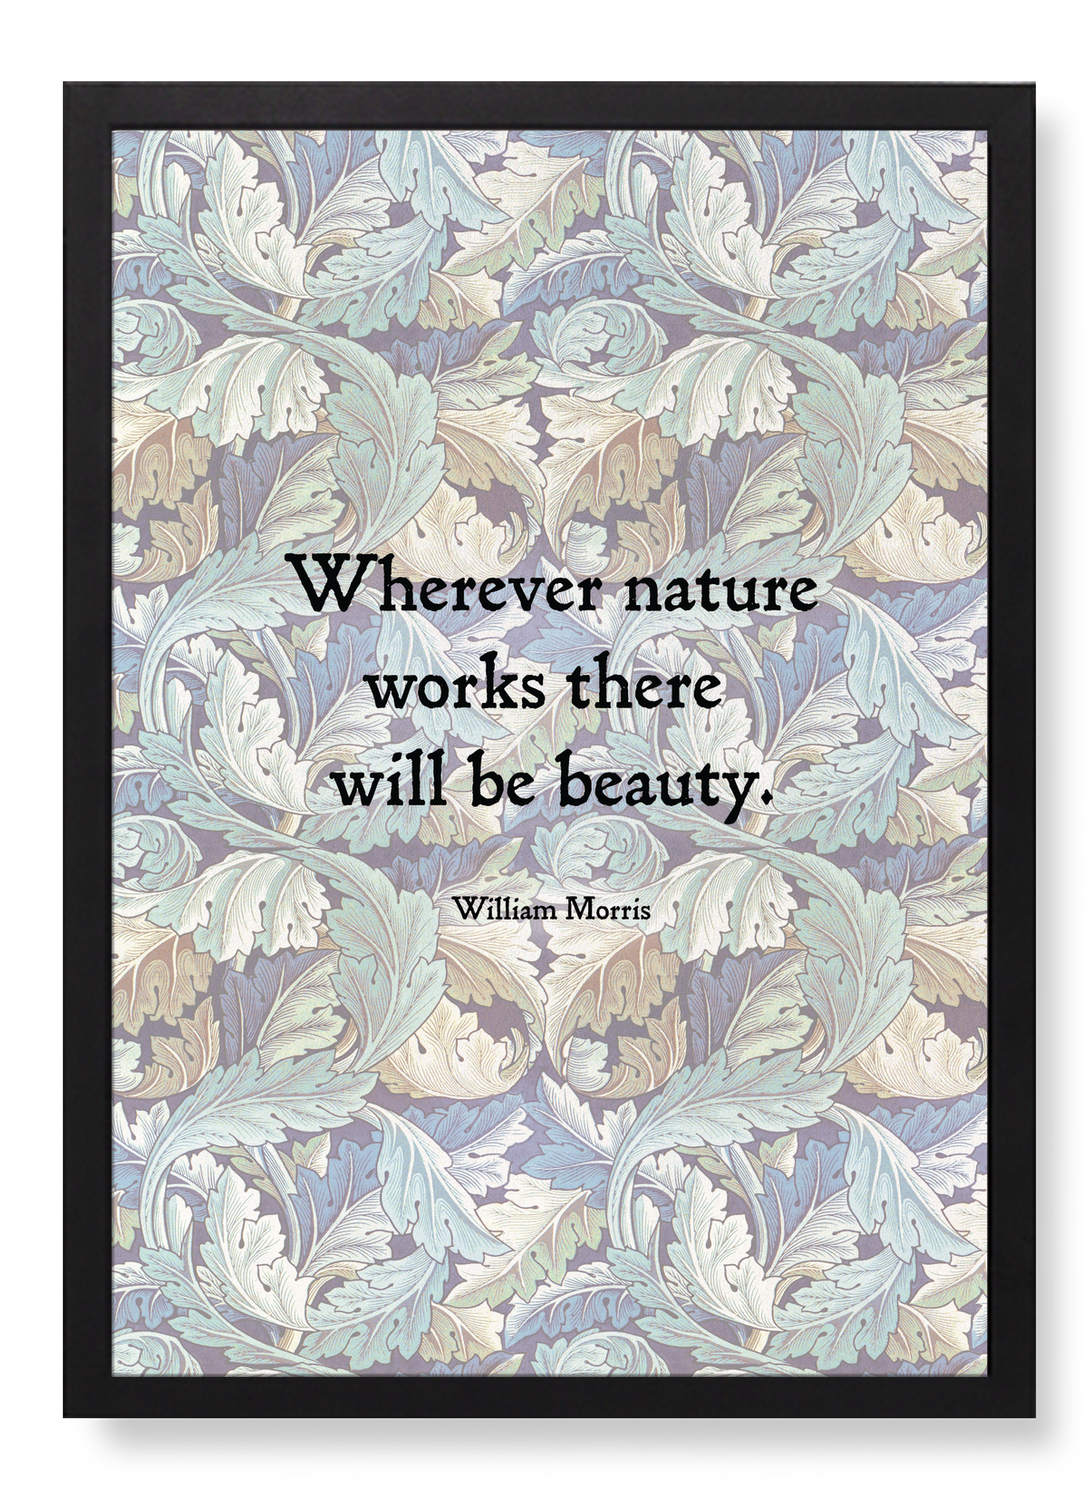 BEAUTY AND NATURE BY WILLIAM MORRIS